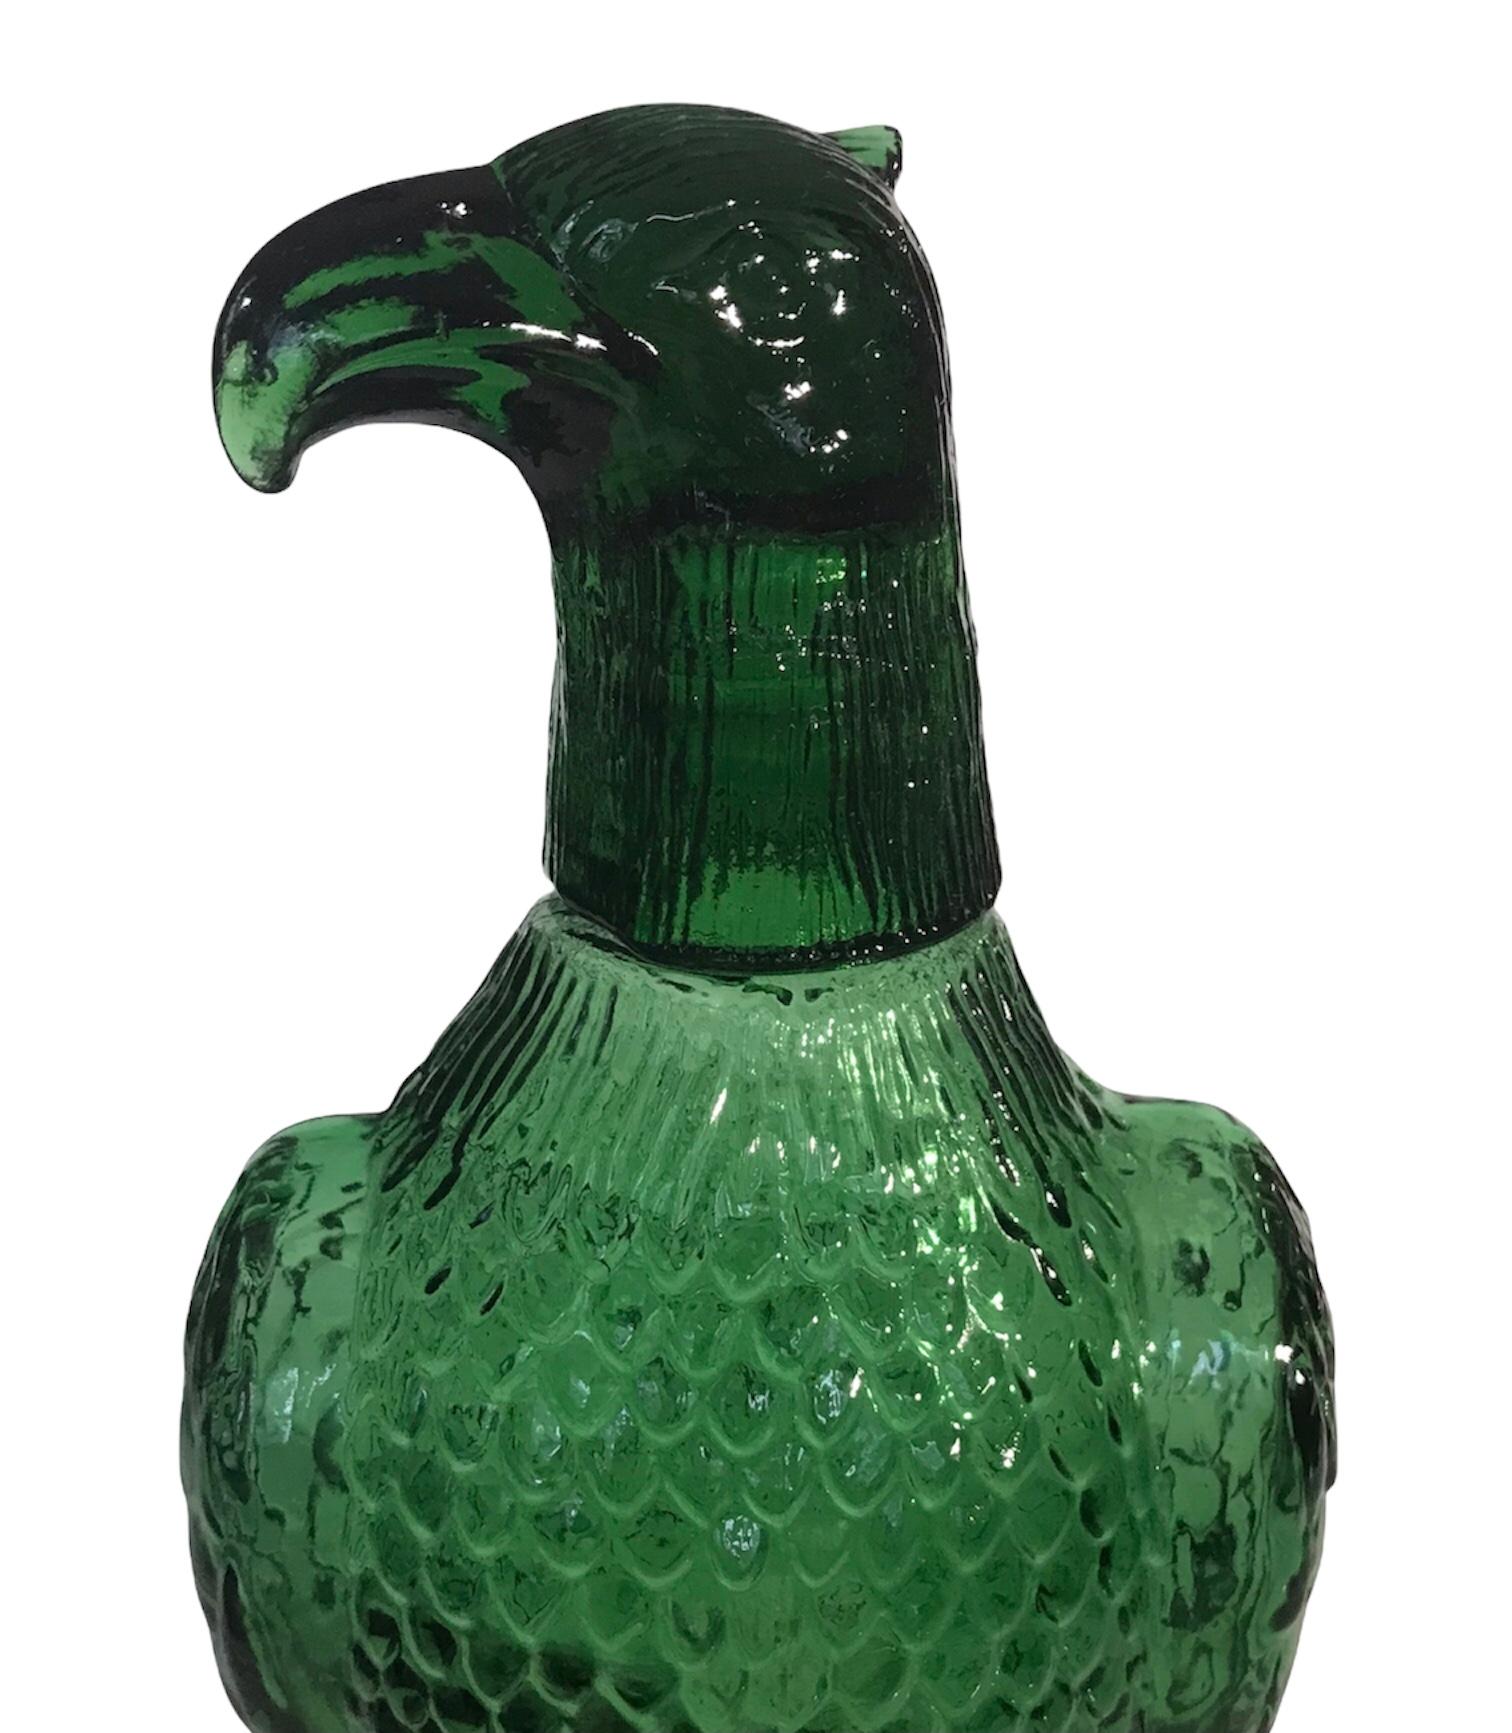 Lovely vintage blown glass Eagle decanter with shot glass head. Stunning shade of emerald green with feather detail covering the body. Eclectic, fun barware.